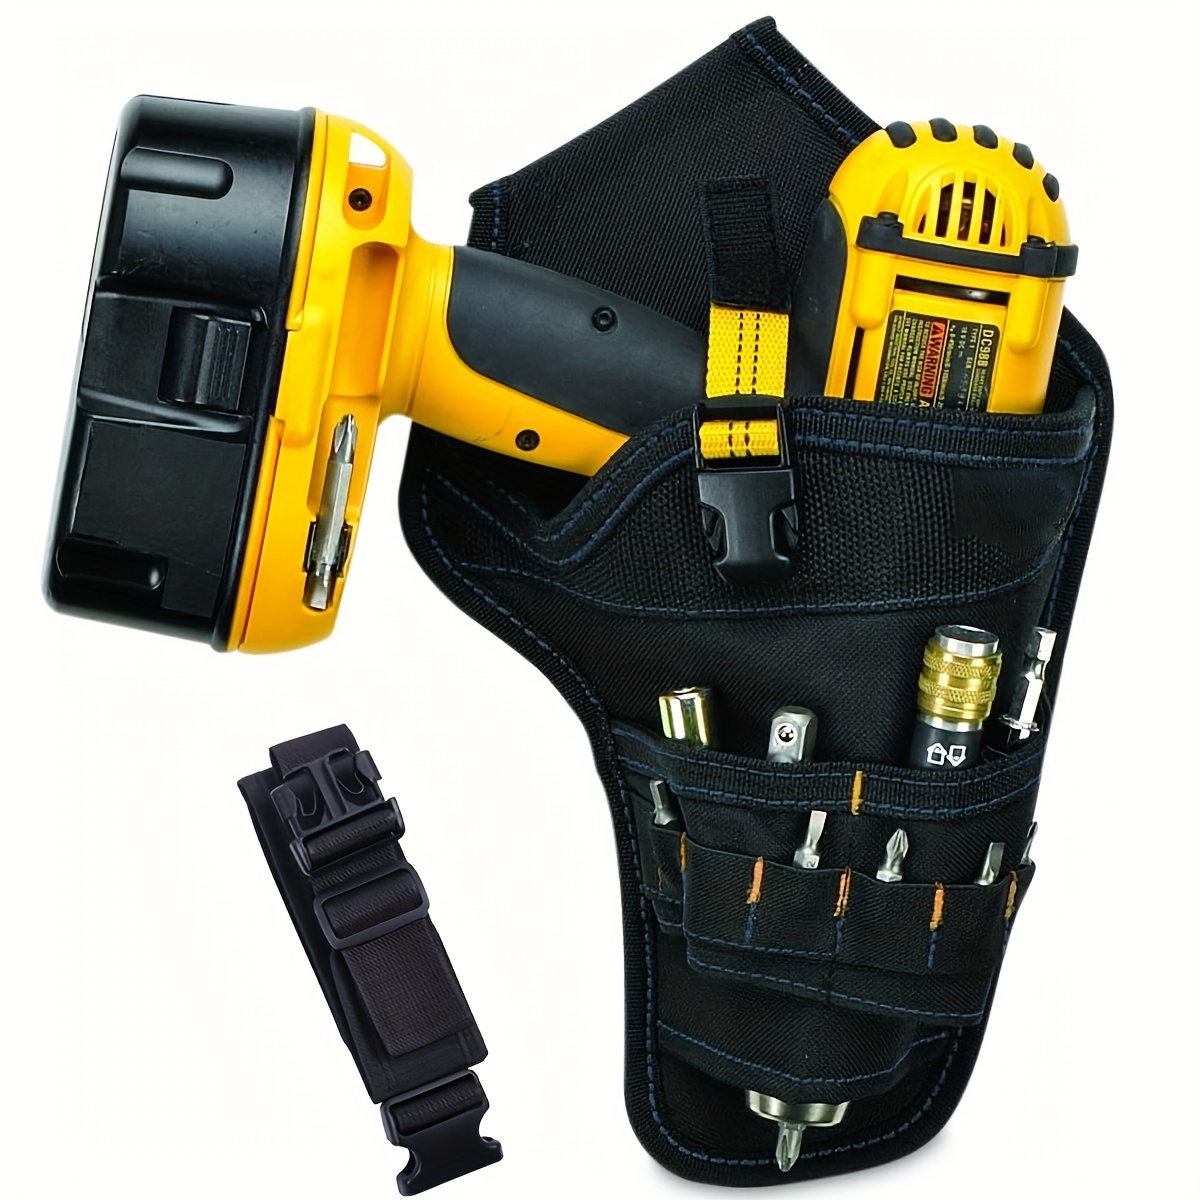 

Securely Attach Your Power Tool Holster With Our Durable Cordless Drill Holster & Metal Clip!